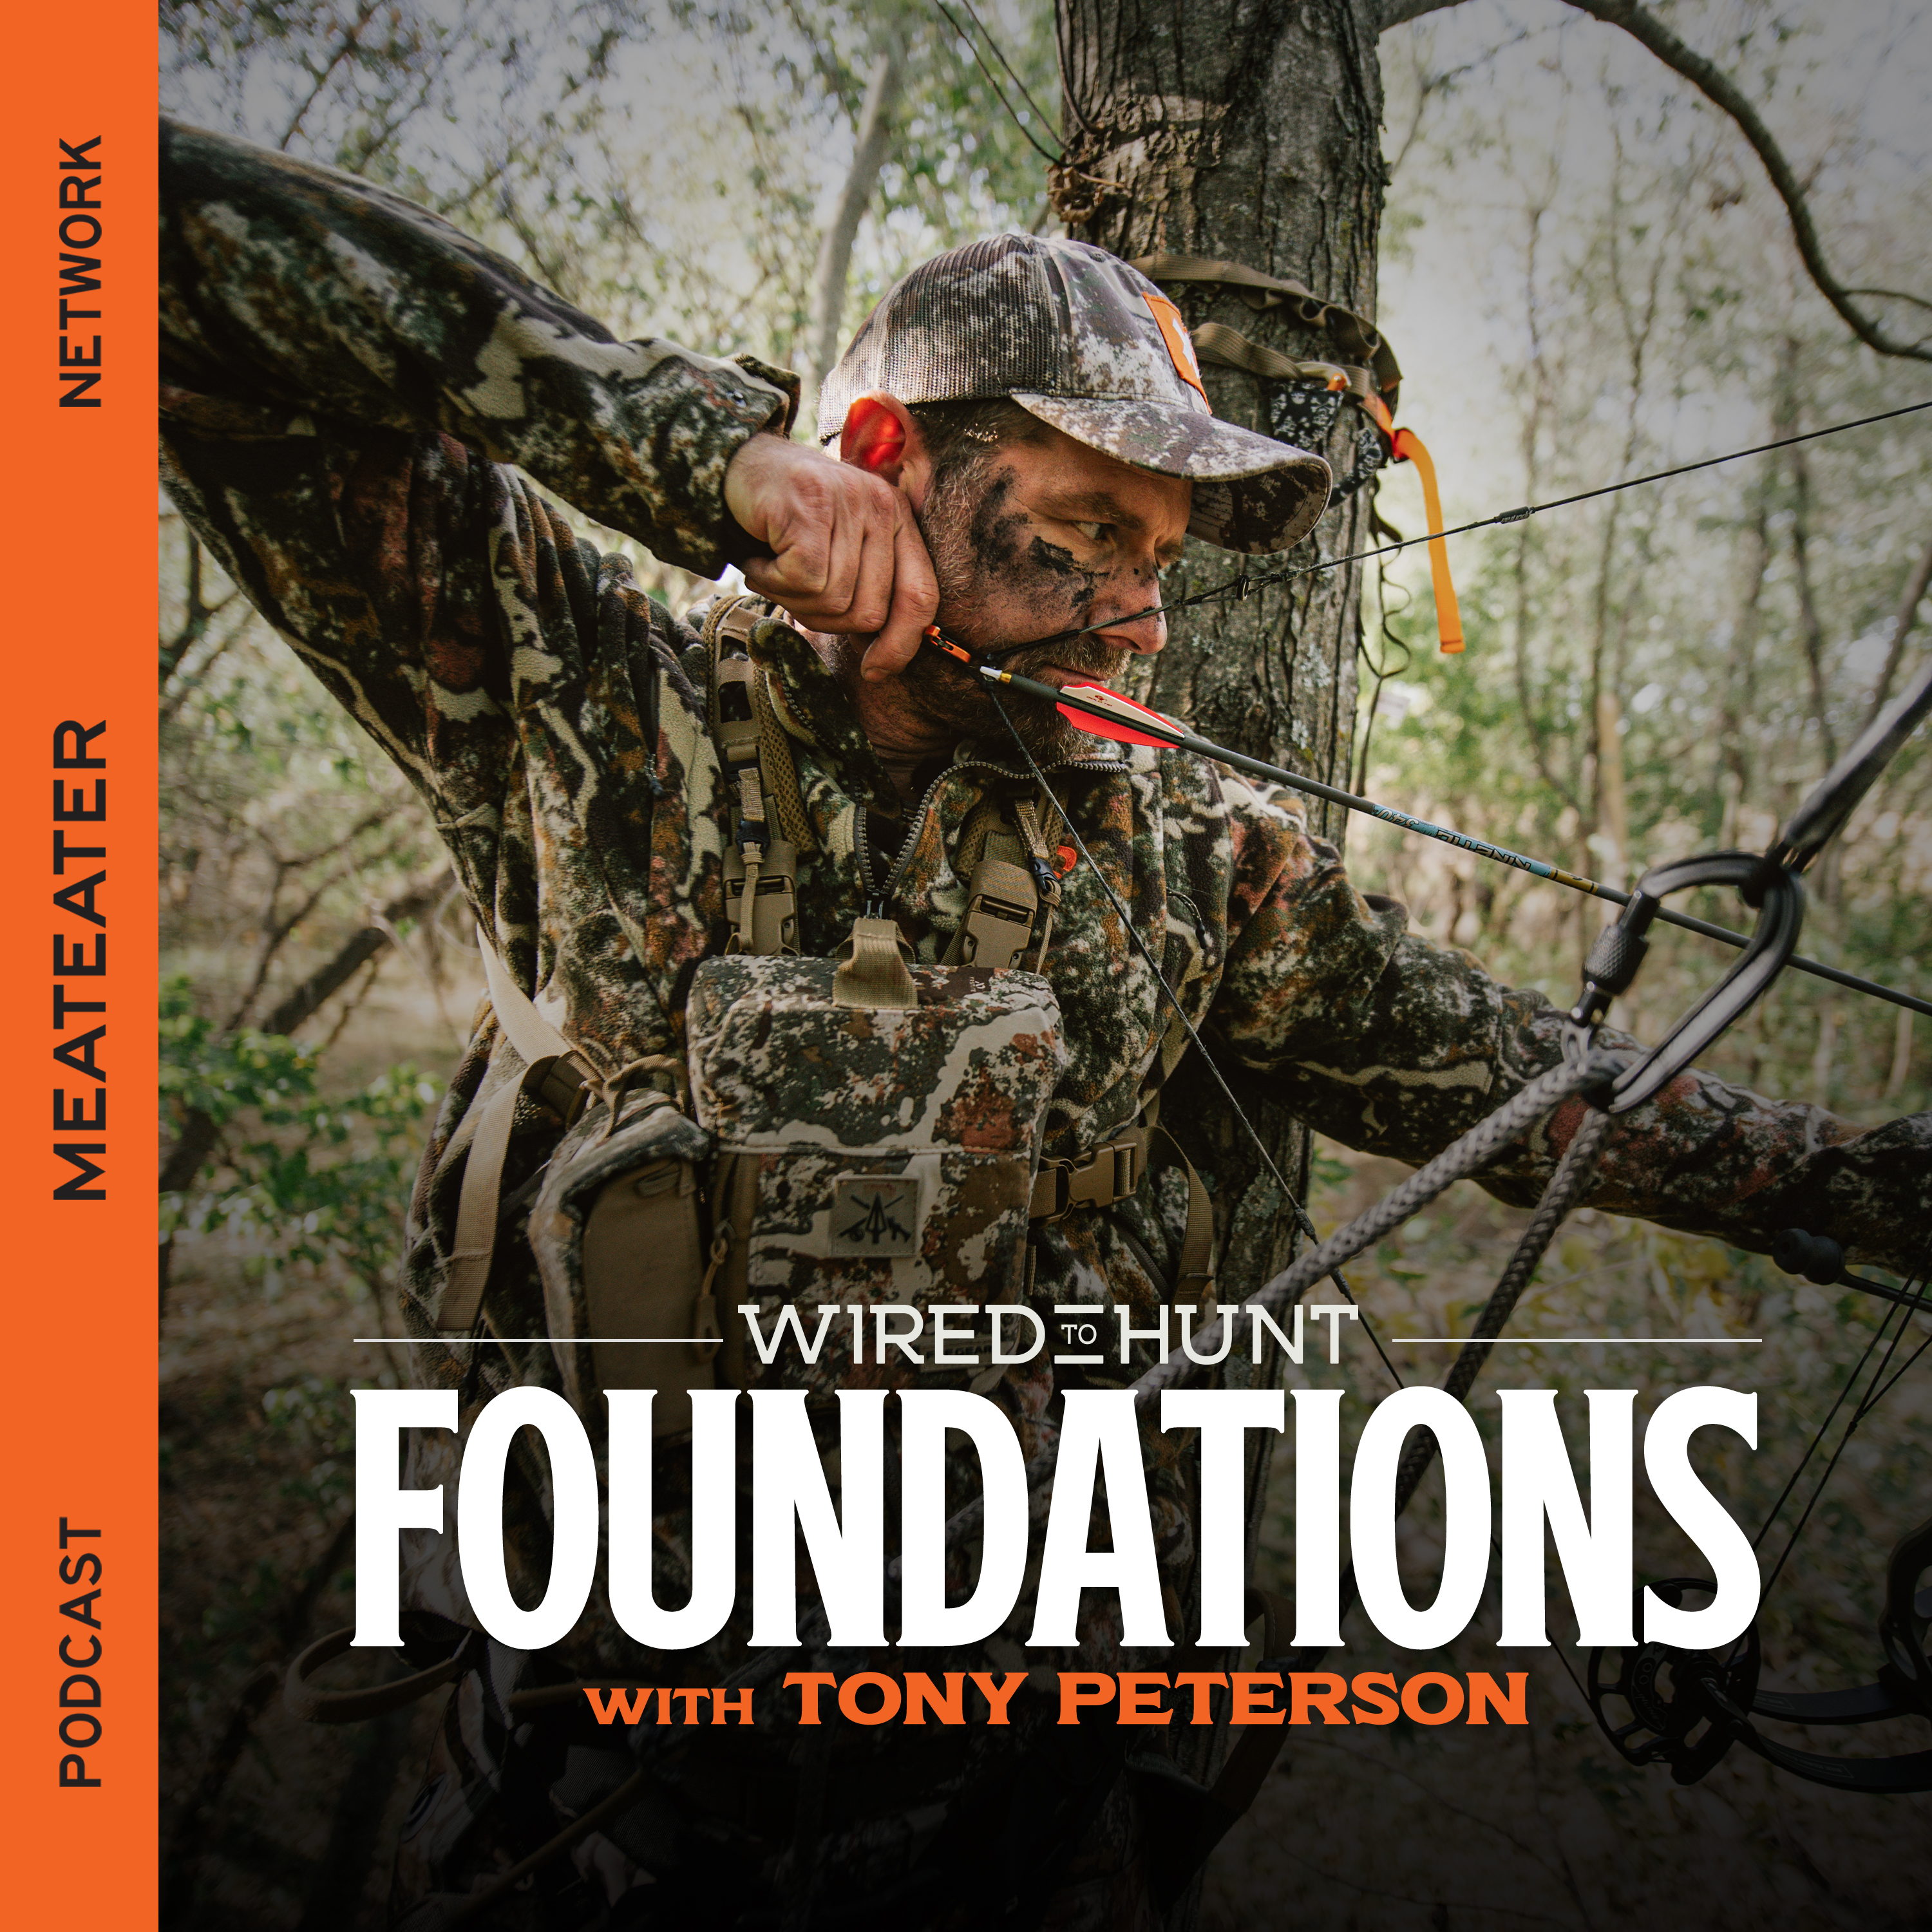 Ep. 786: Foundations - How the Worst Hunting Can Make You a Better Hunter